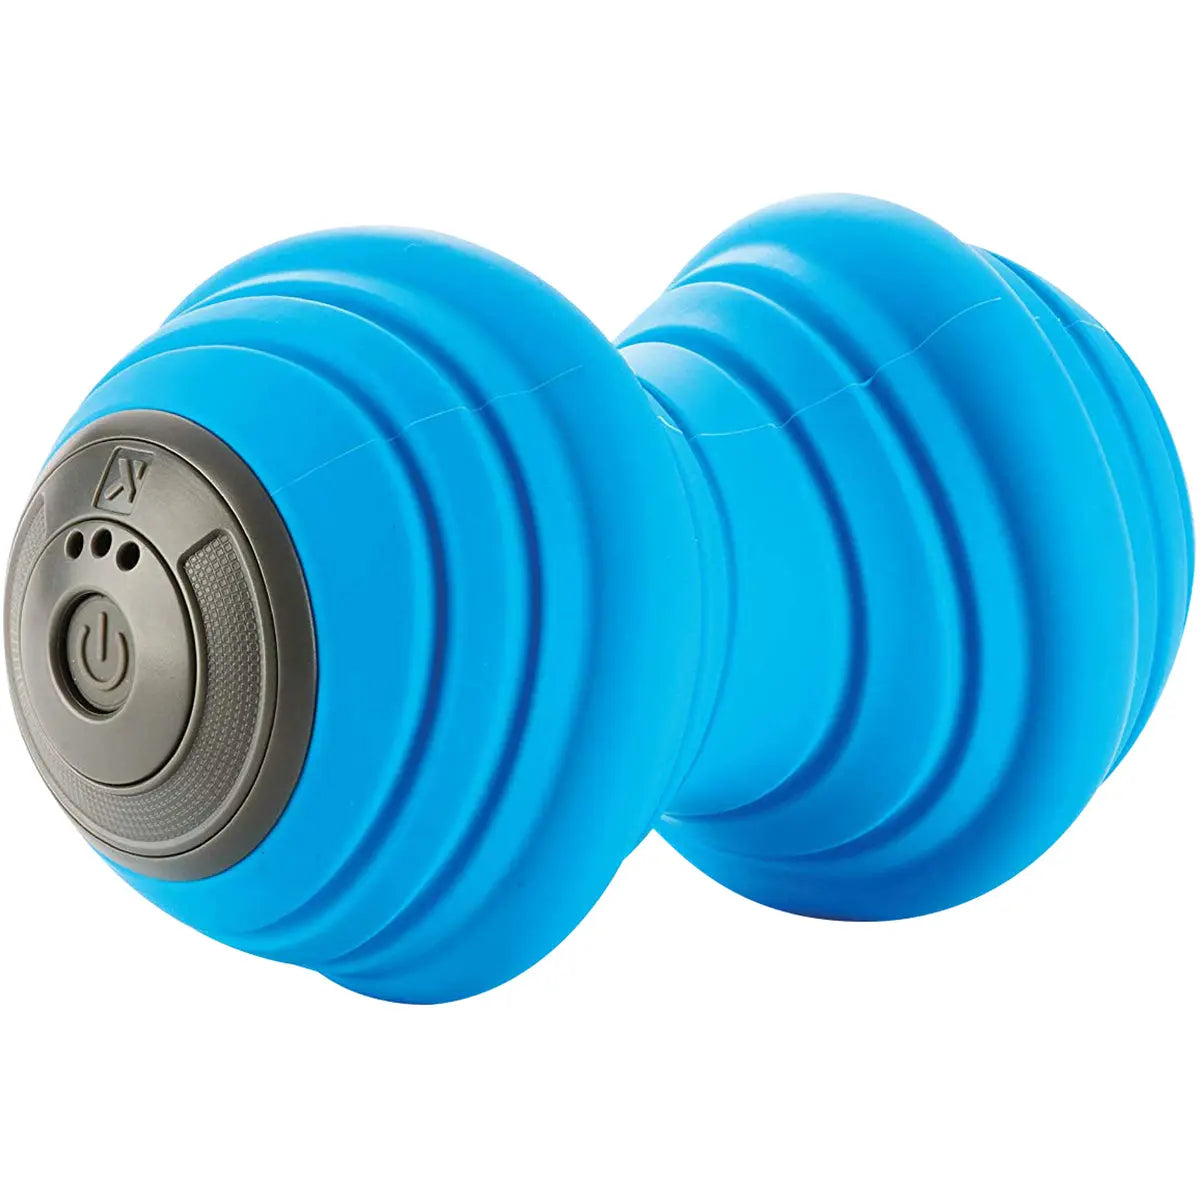 TriggerPoint CHARGE Vibe Vibrating Massage Roller - Blue TriggerPoint